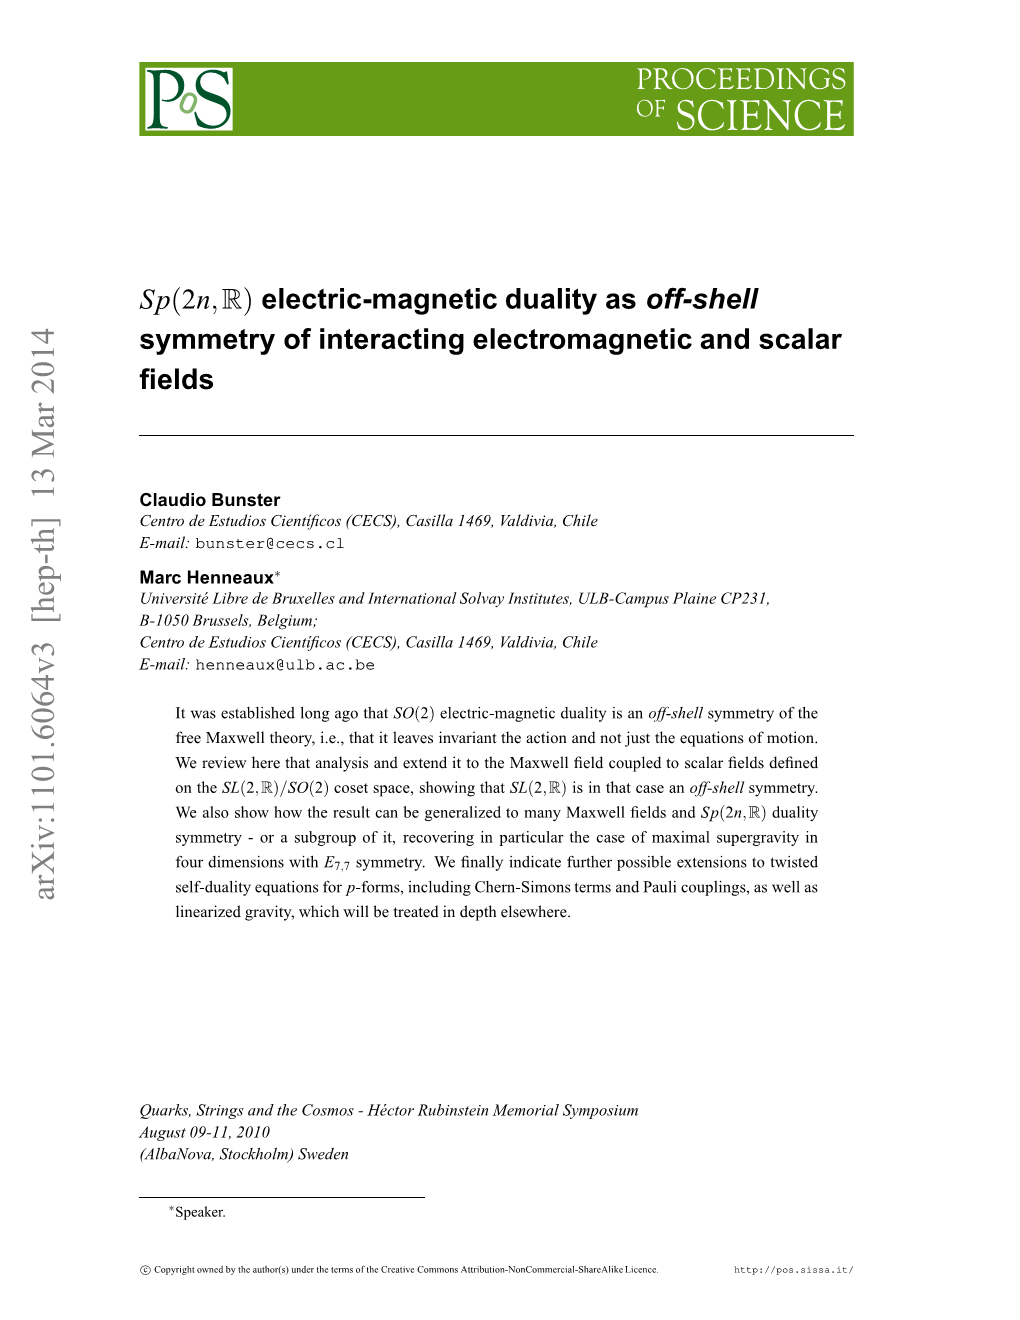 Sp (2N, R) Electric-Magnetic Duality As Off-Shell Symmetry of Interacting